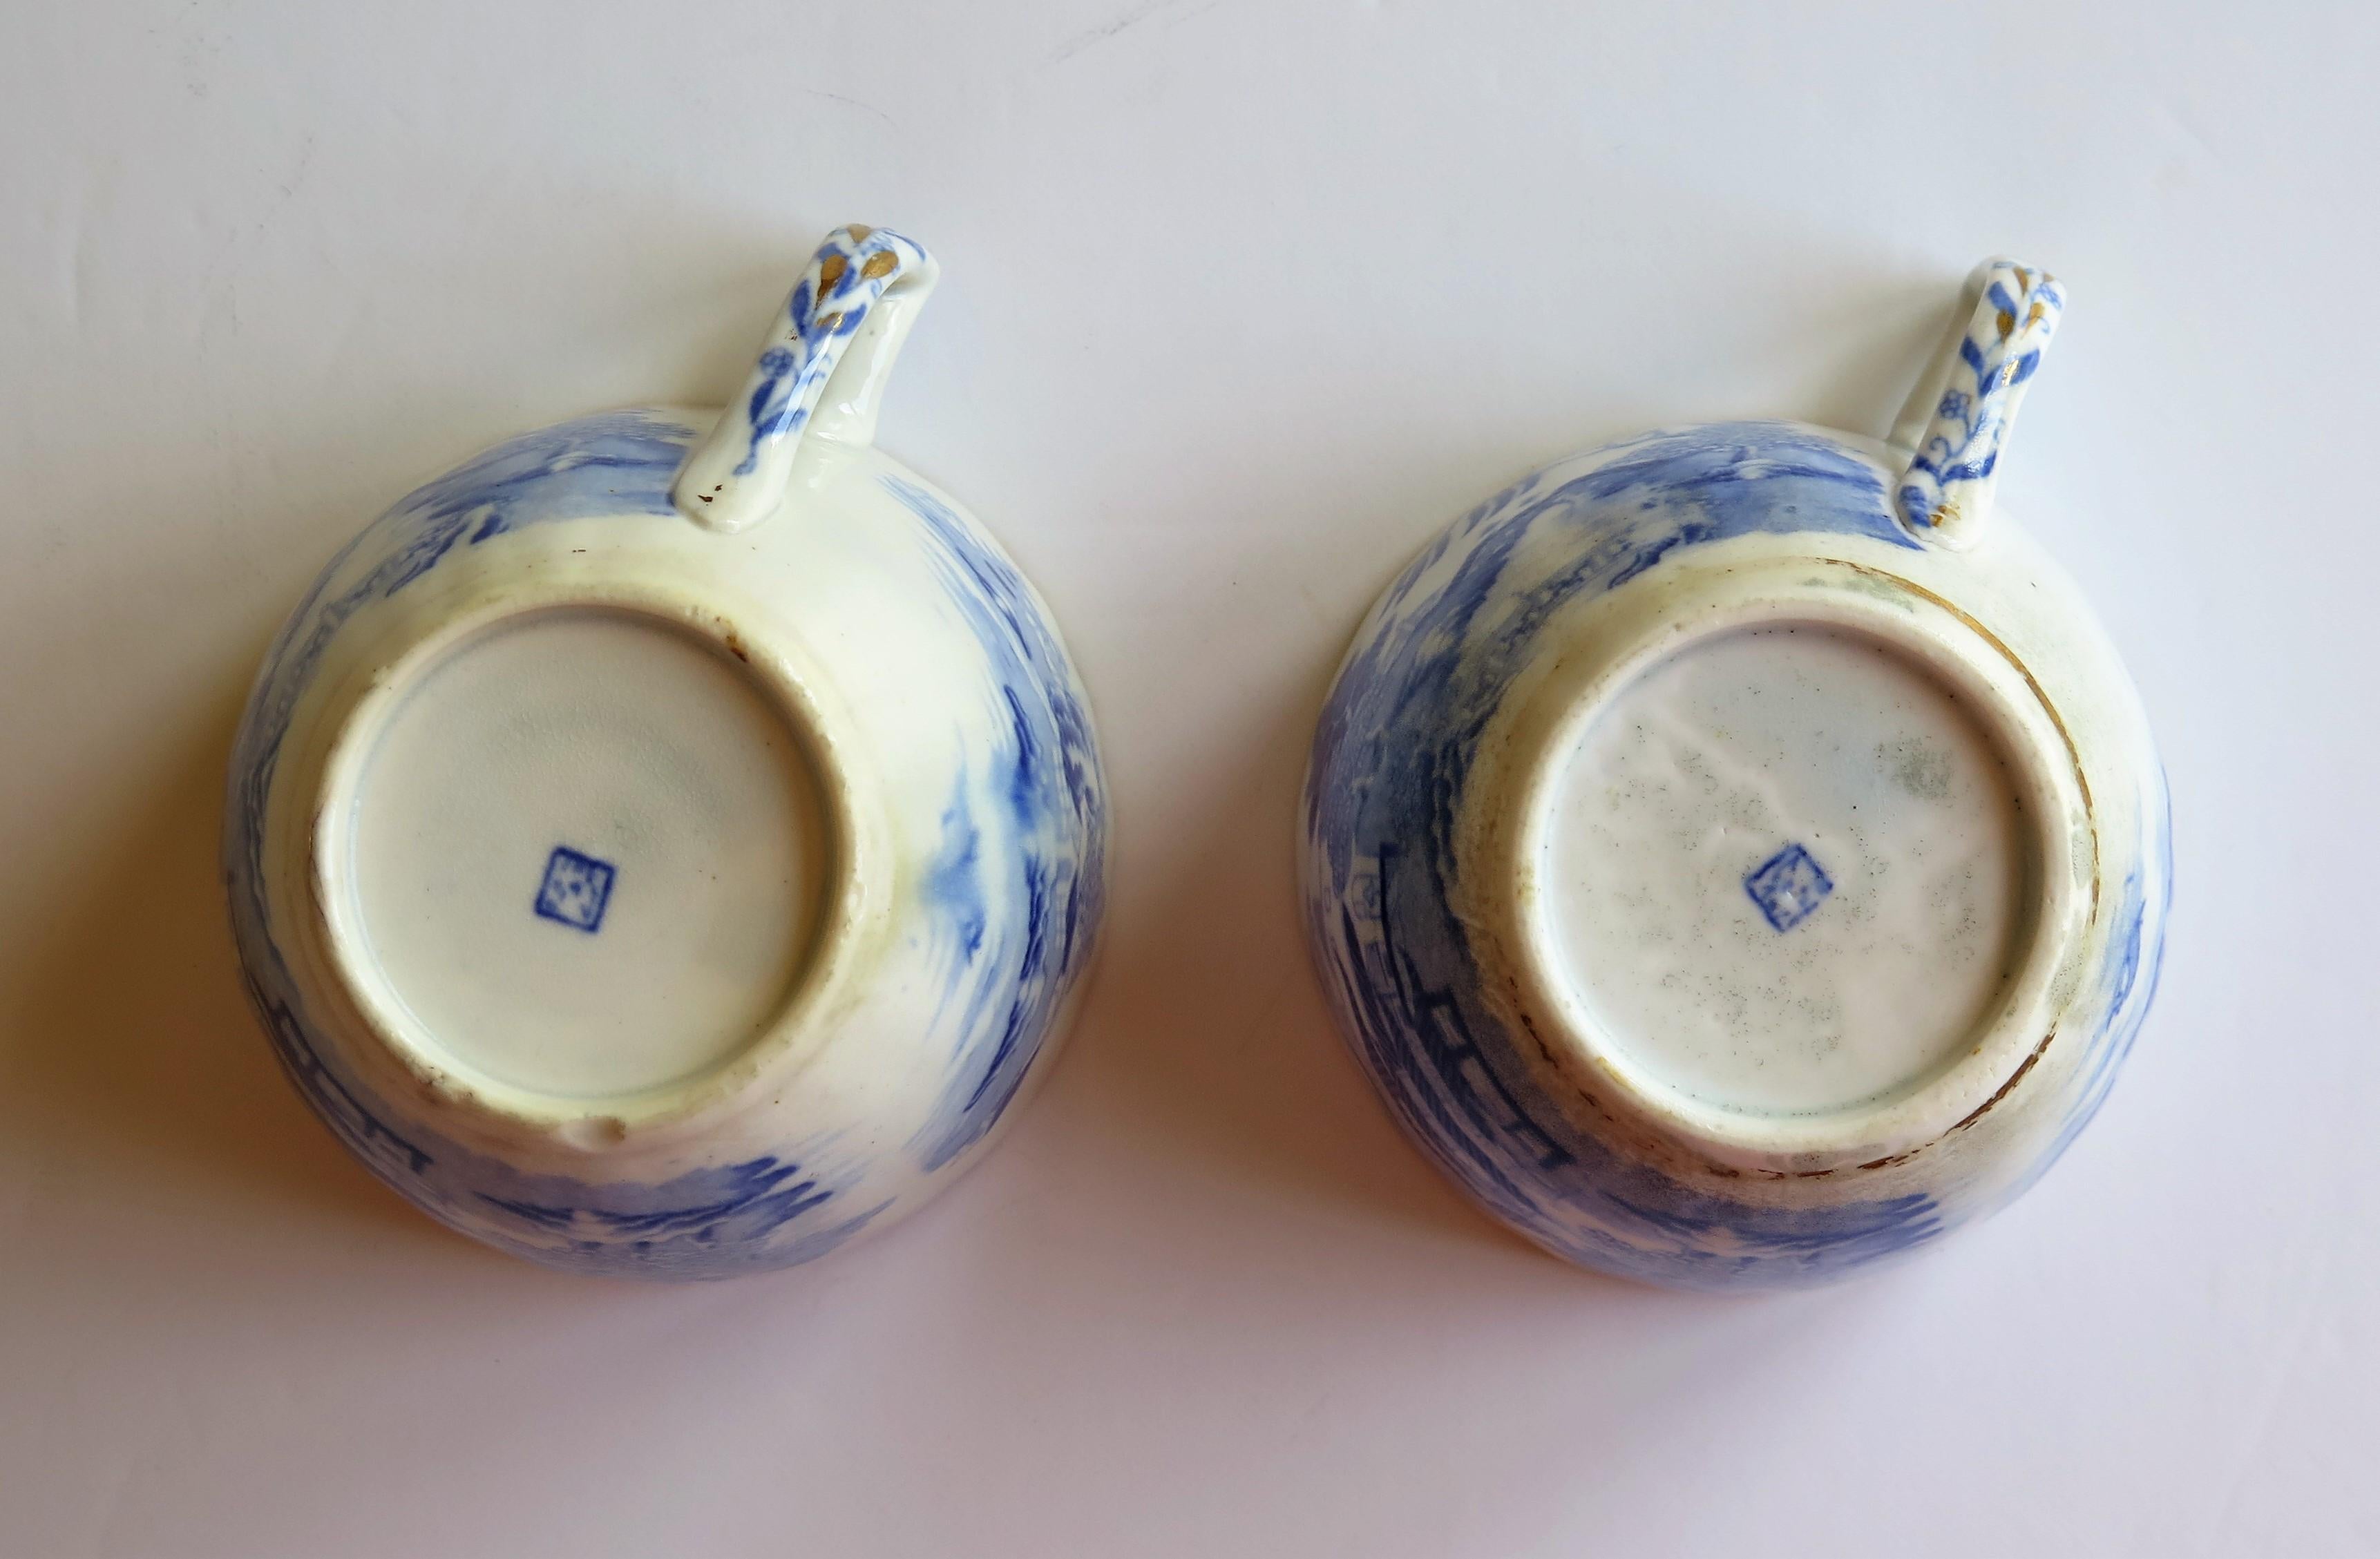 Miles Mason Porcelain Pair of Tea Cups Broseley Blue and White Pattern, Ca 1805 10